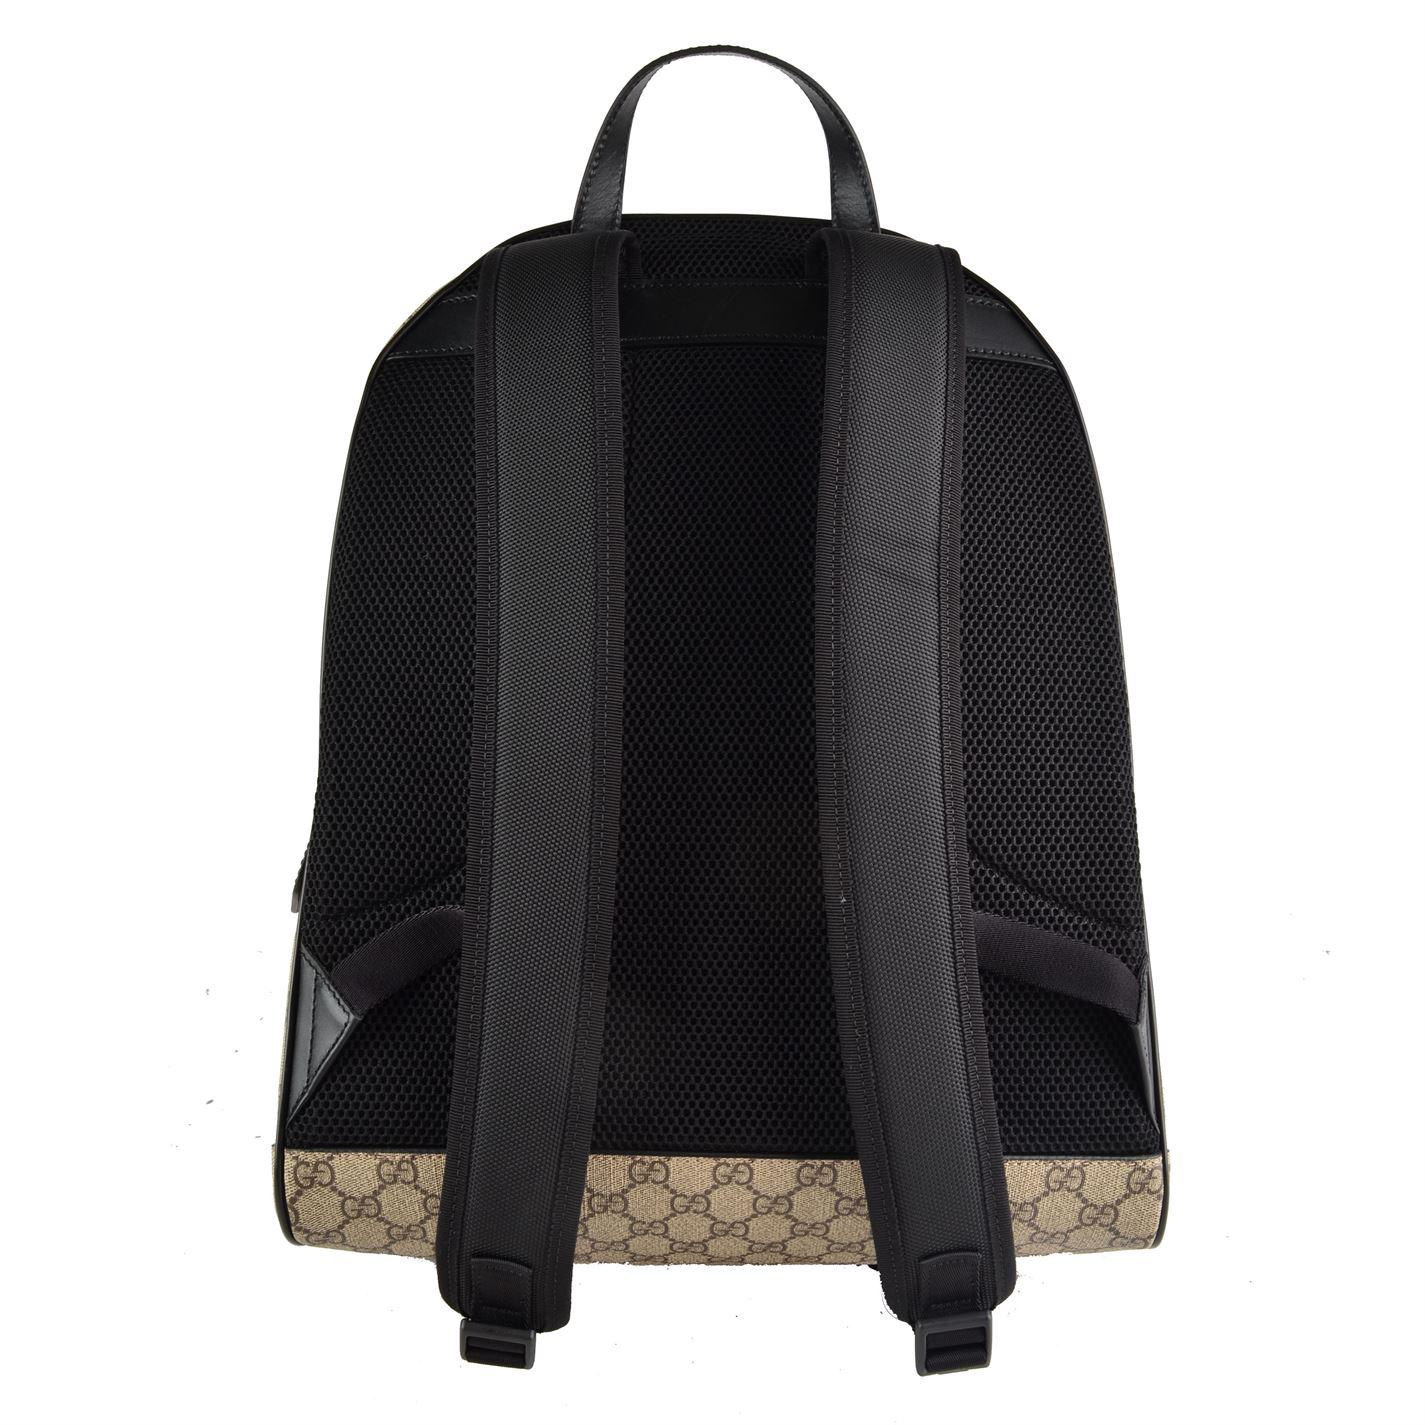 Gucci Canvas Gg Supreme Backpack With Web in Beige (Natural) - Lyst